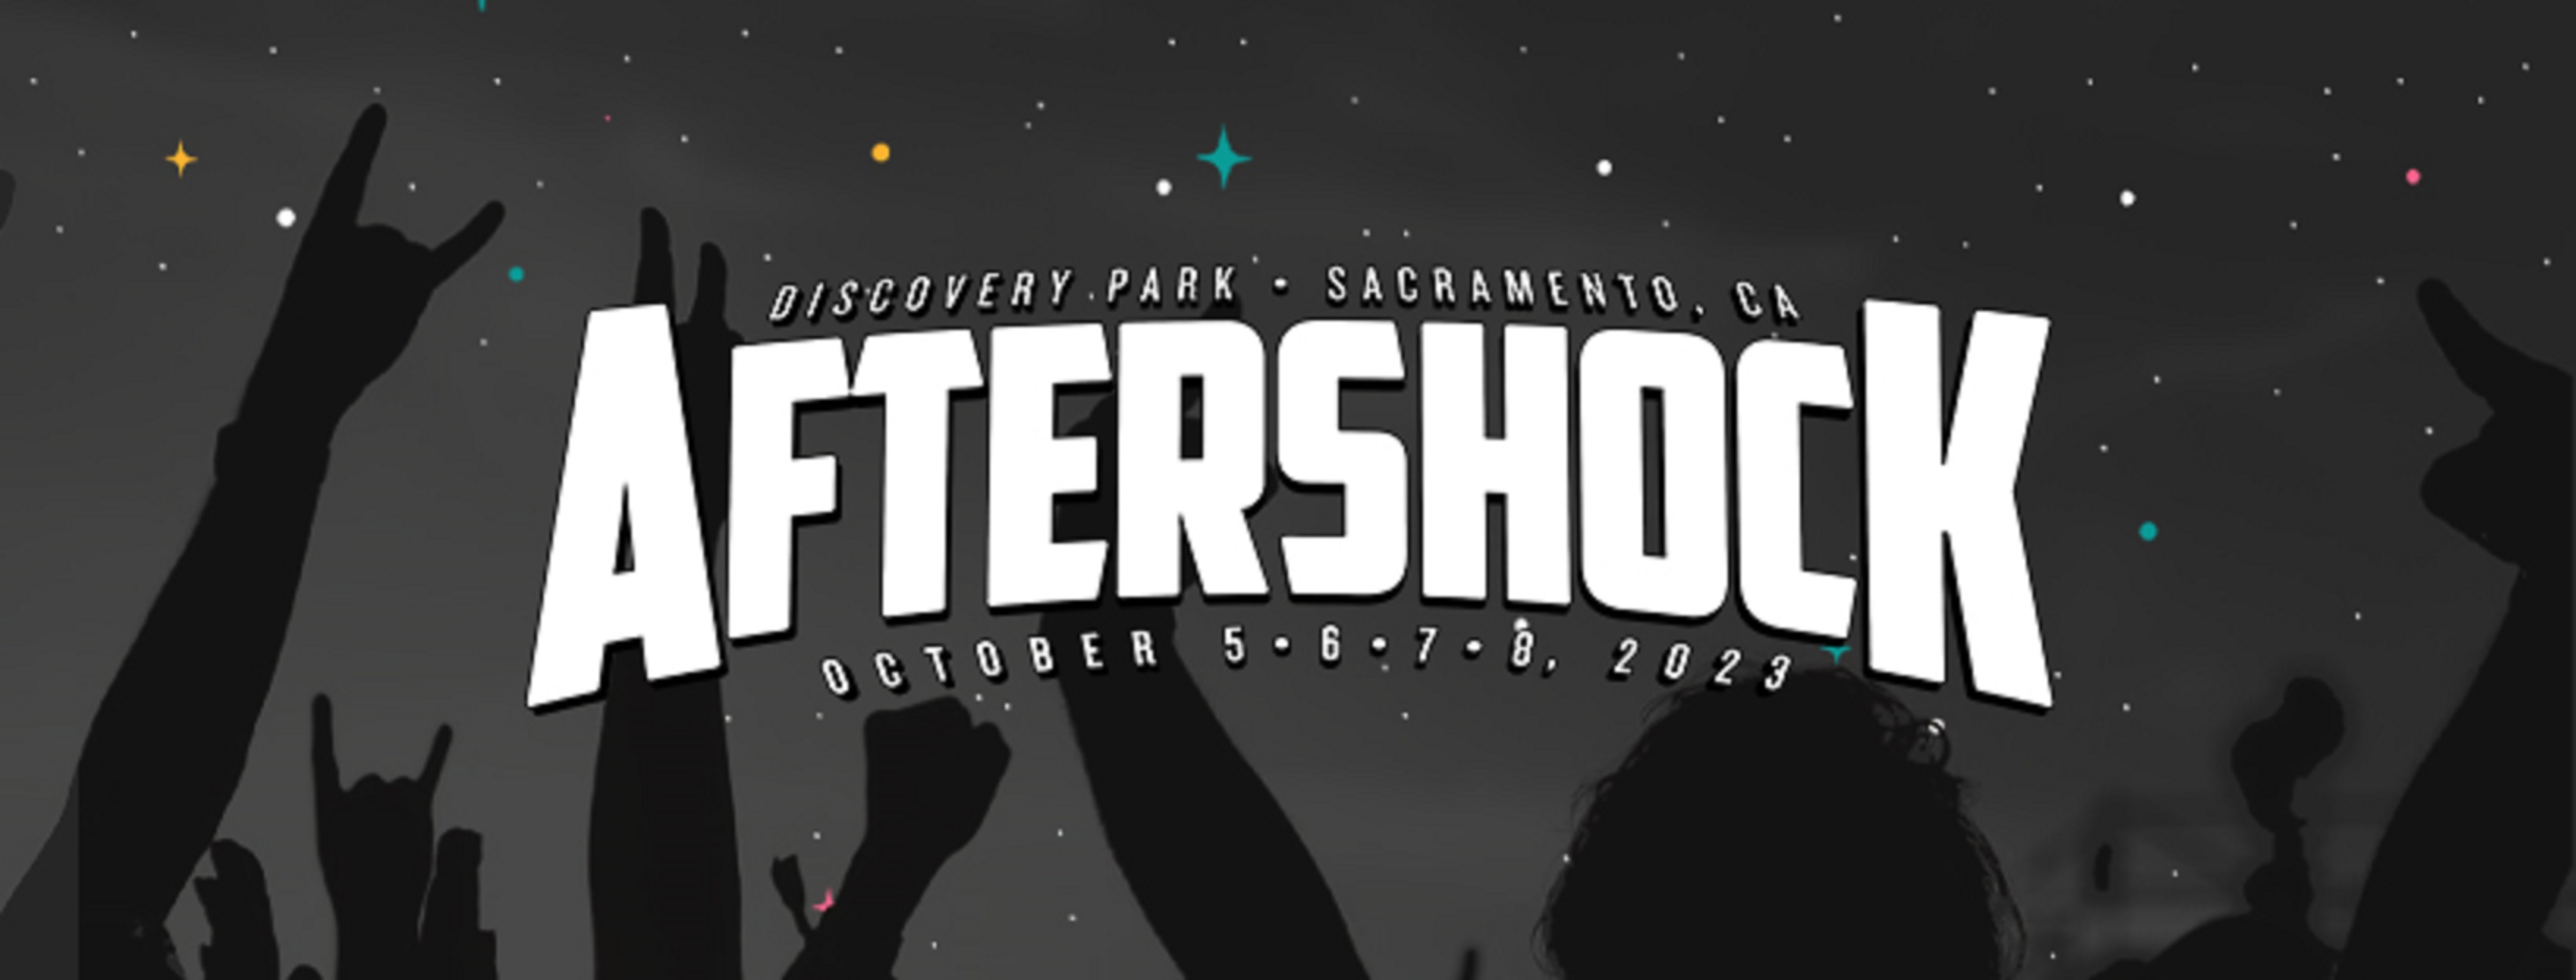 Aftershock Music Festival Announce 2023 Dates